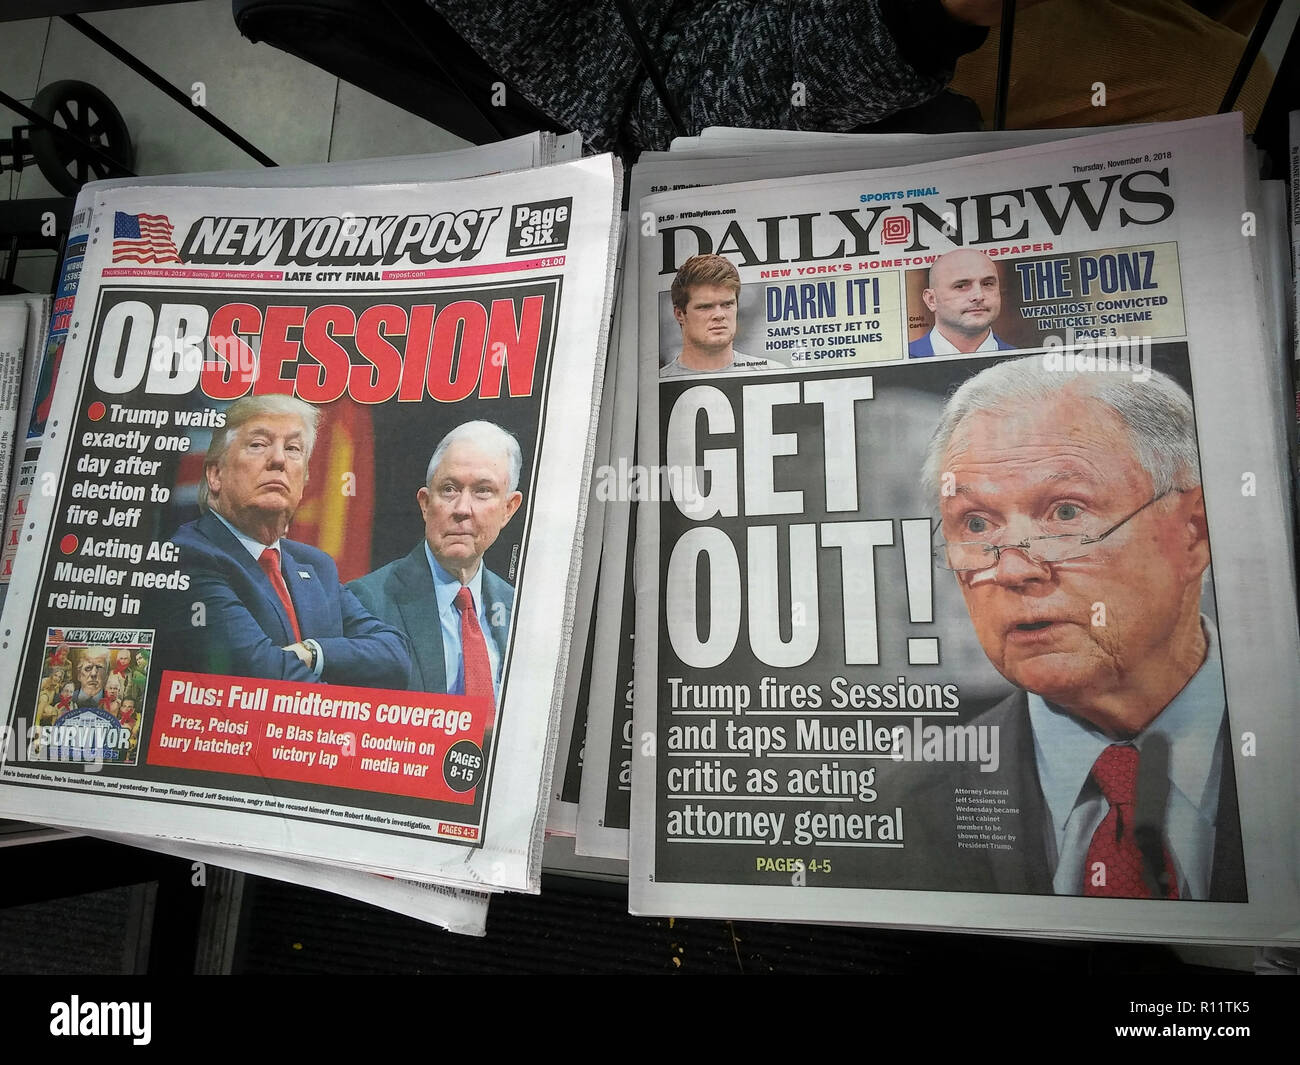 Headlines of the New York Post and Daily News newspapers on Thursday, November 8, 2018 report on the previous days' firing of U.S. Attorney General Jeff Sessions by President Donald Trump, one day after the mid-term elections. (© Richard B. Levine) Stock Photo